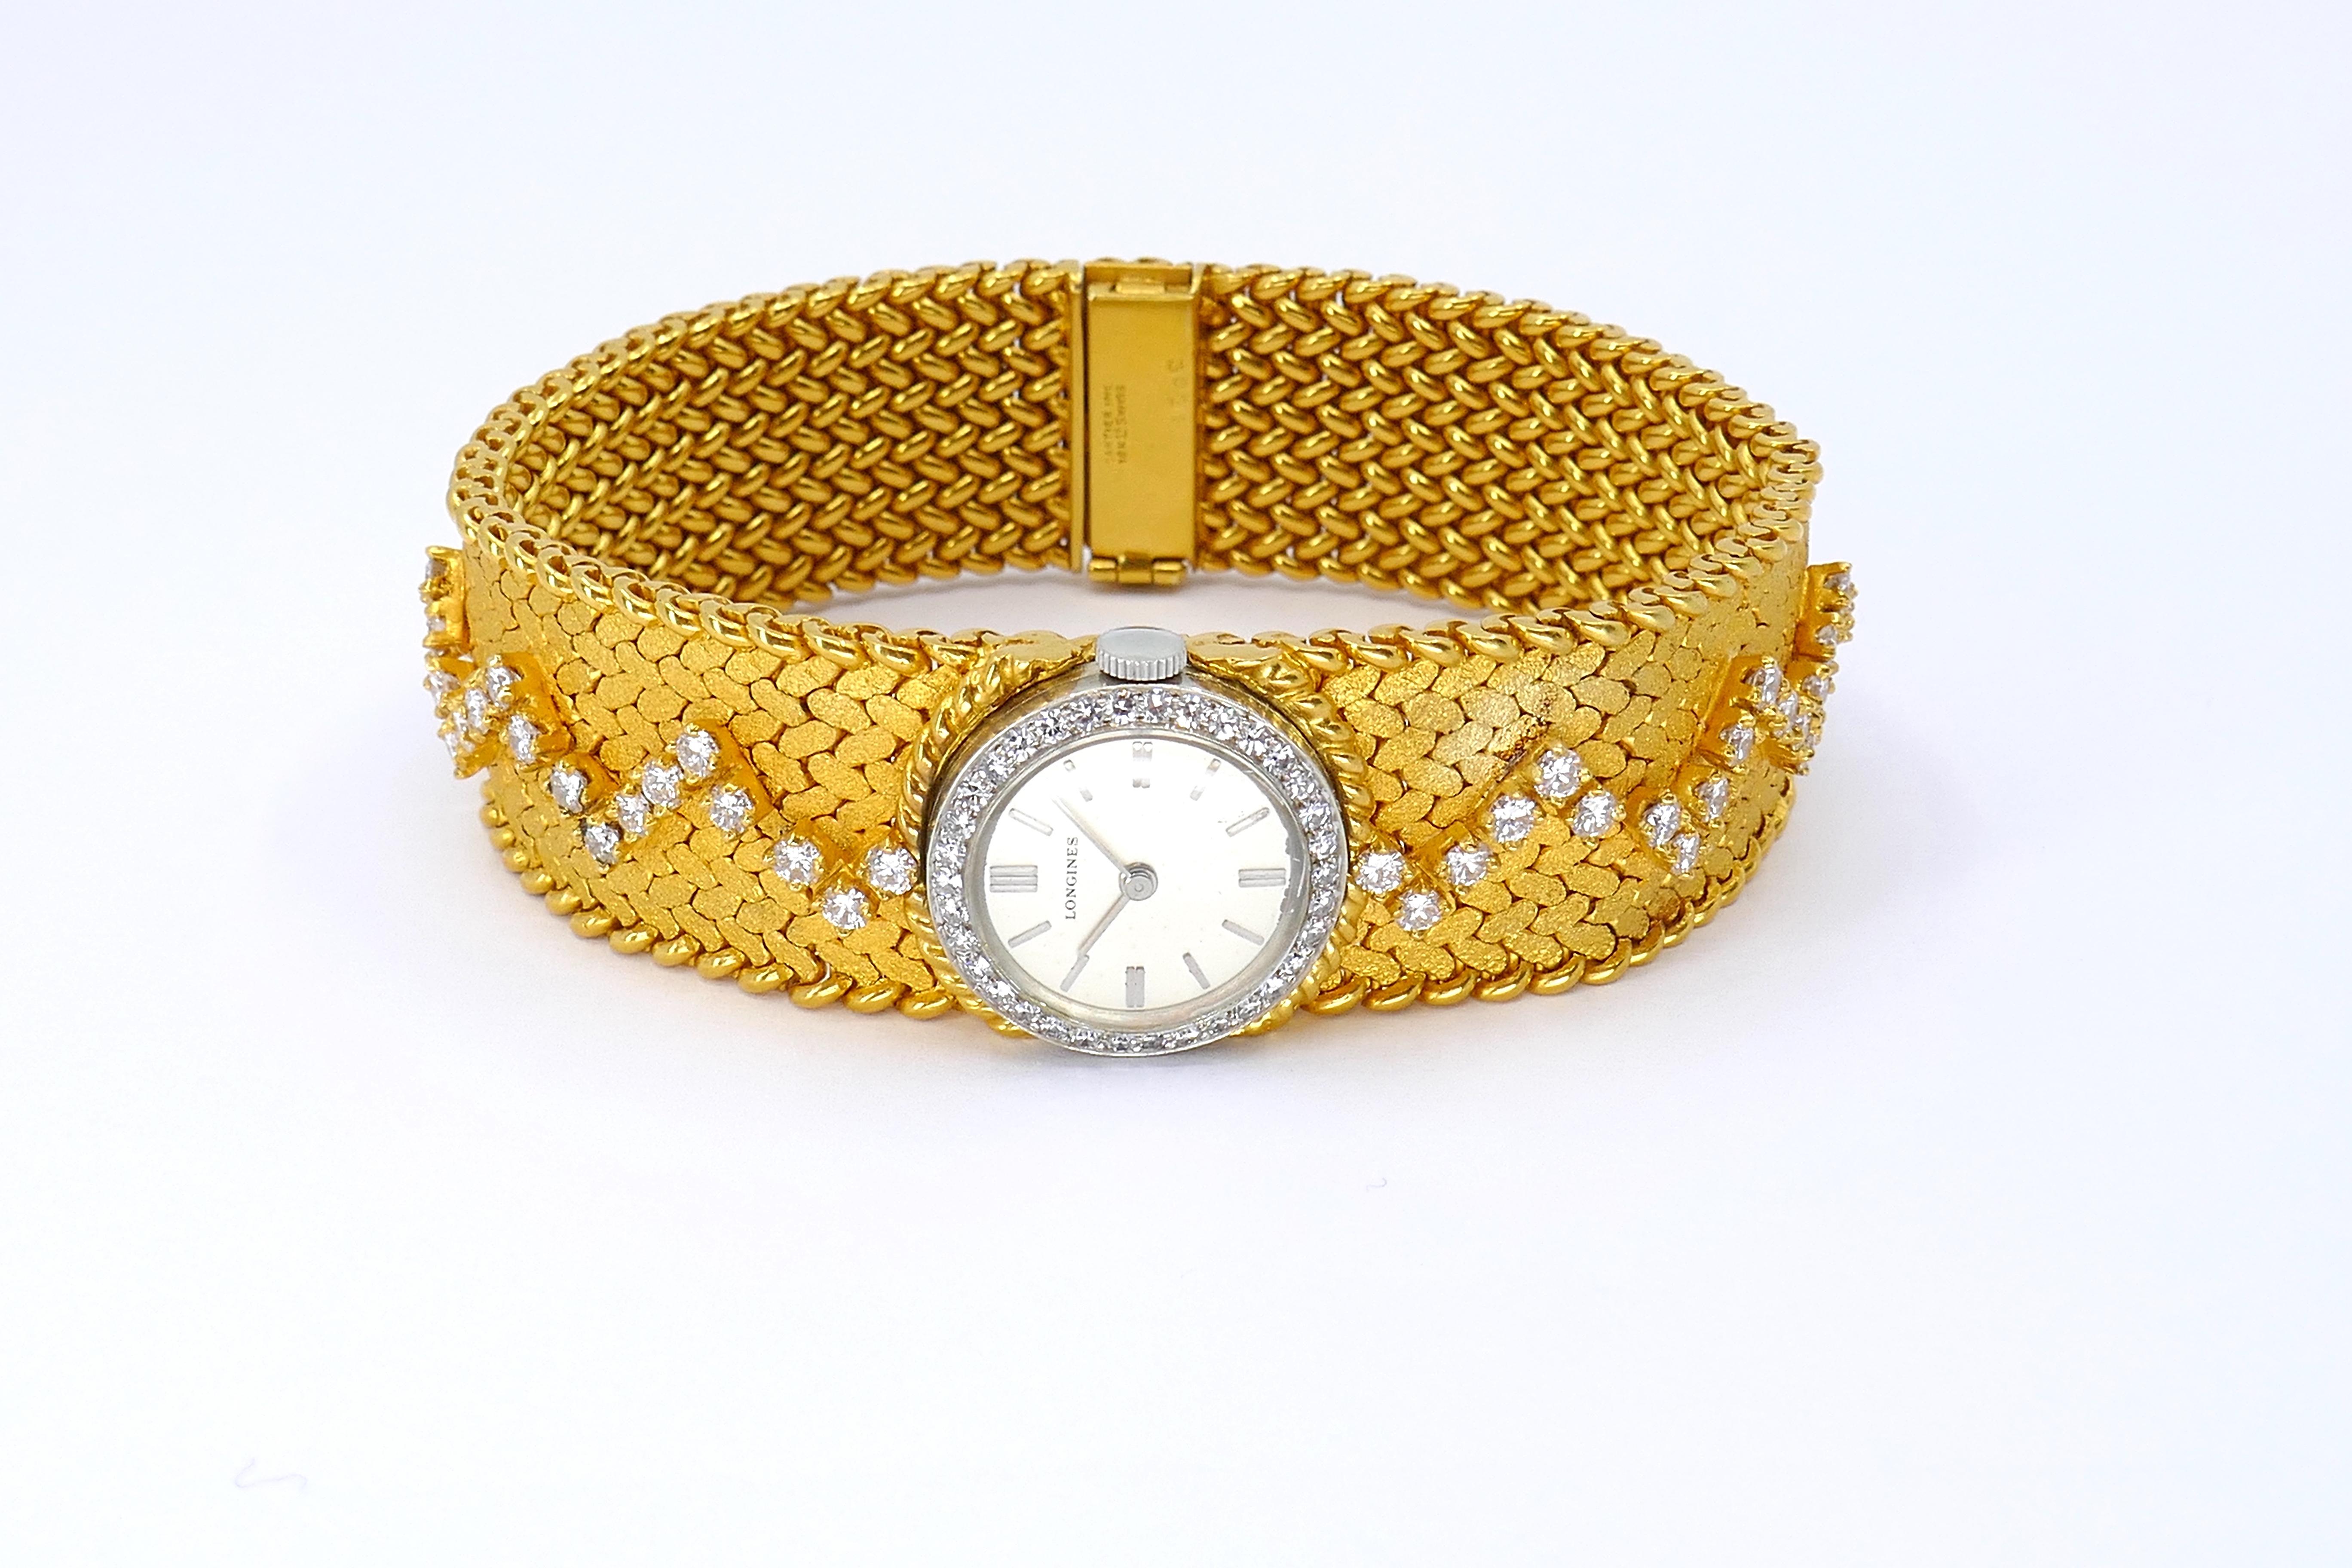 Cartier 18 Karat Yellow Gold Diamond Longines Movement Wristwatch

Company: Cartier
Movement: Longines
Metal: 18k Yellow Gold
Condition: Excellent
Year Of Manufacture: Circa 1940s
Length:7.5 inches
Gemstone: Diamond
Diamond weight: 4 CT 